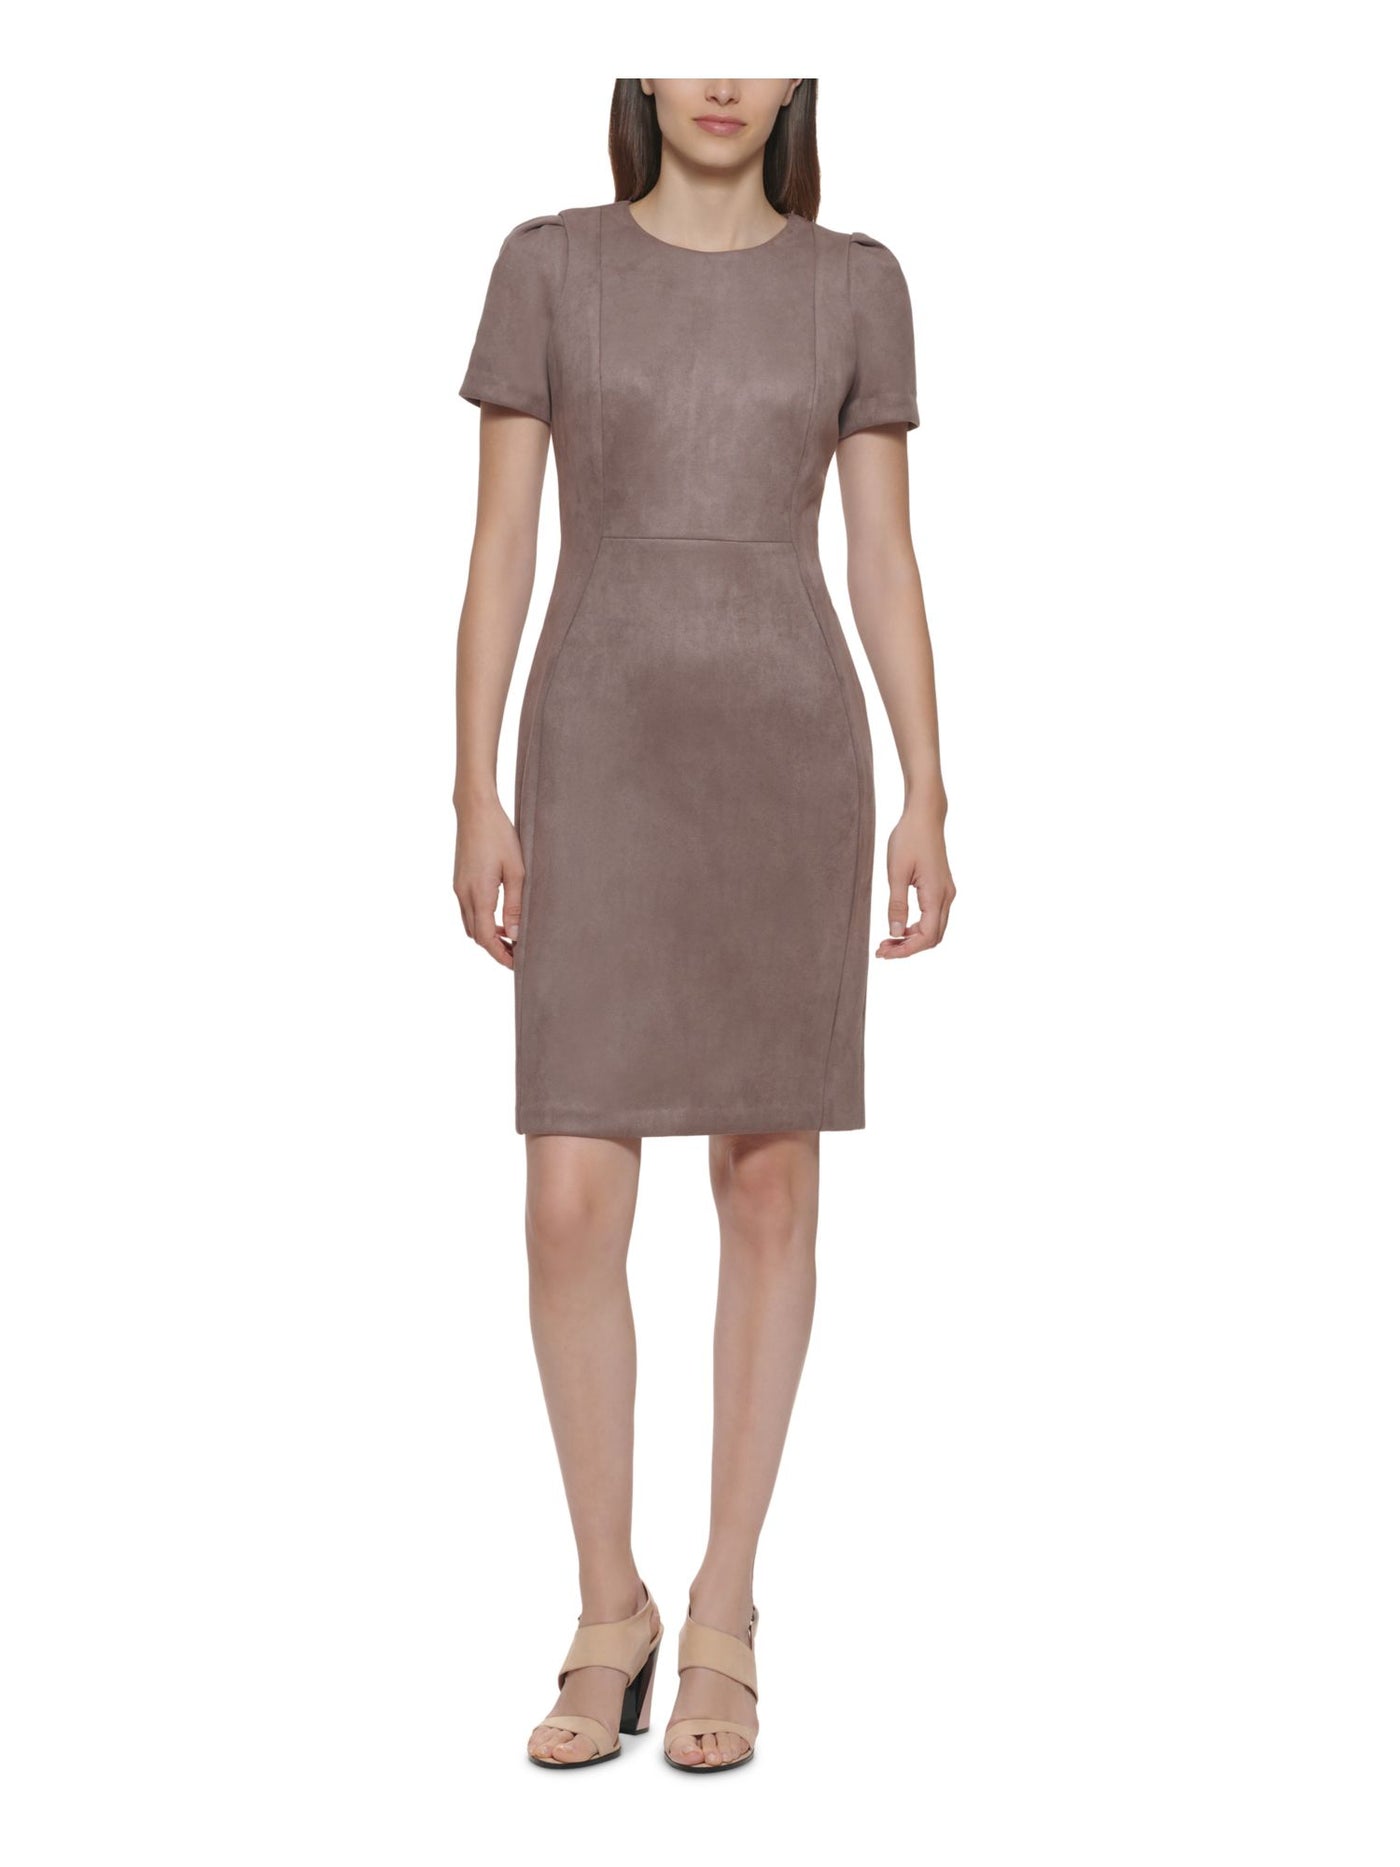 CALVIN KLEIN Womens Brown Stretch Zippered Fitted Pouf Sleeve Jewel Neck Above The Knee Party Sheath Dress Petites 4P